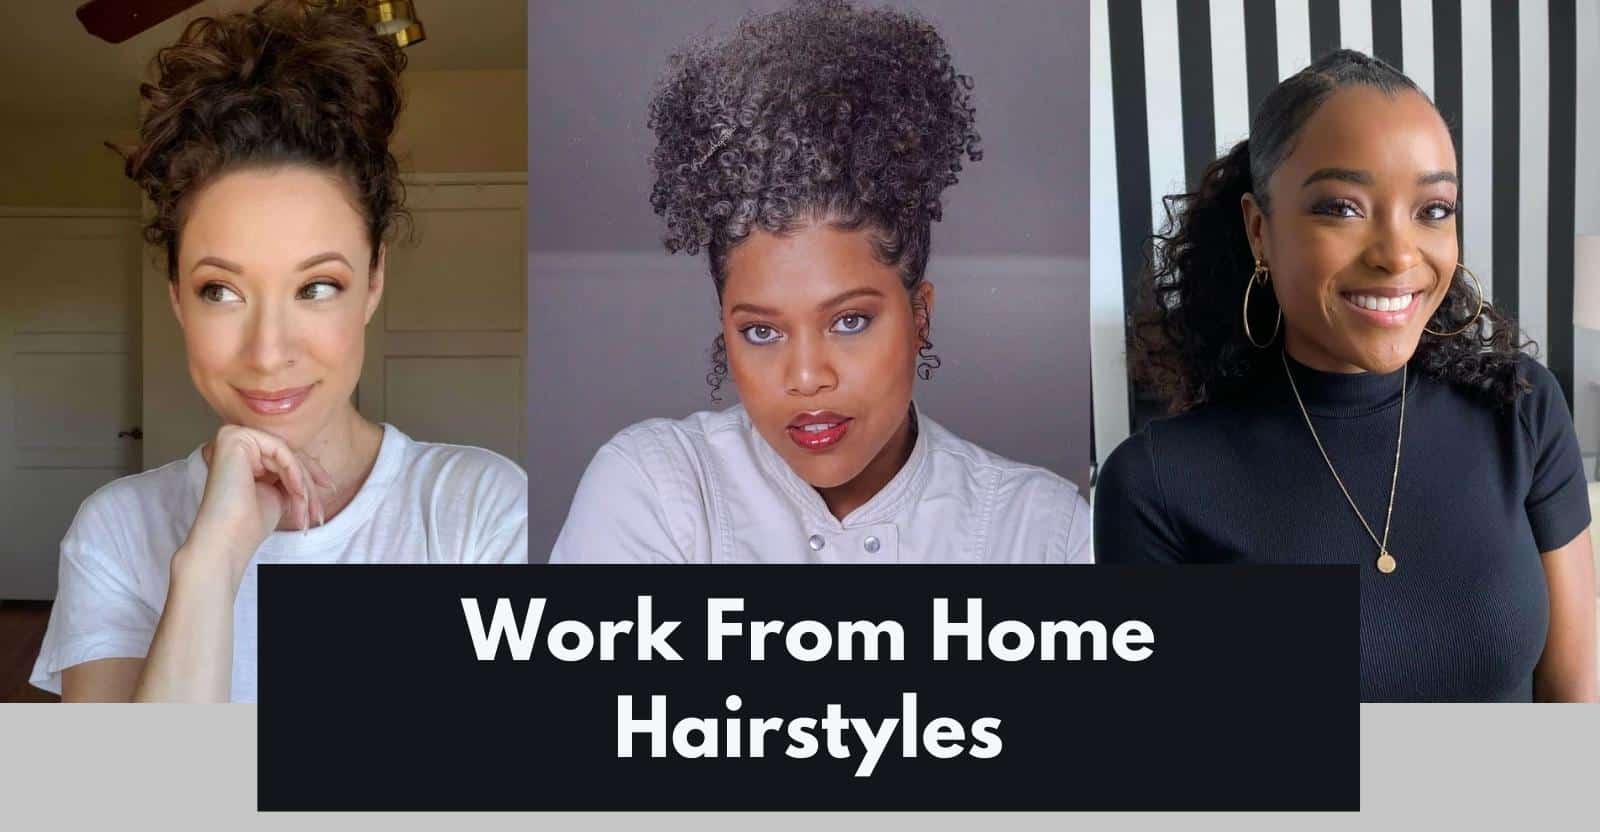 15 Easy Work From Home Hairstyles For Women | Get Ready In Min